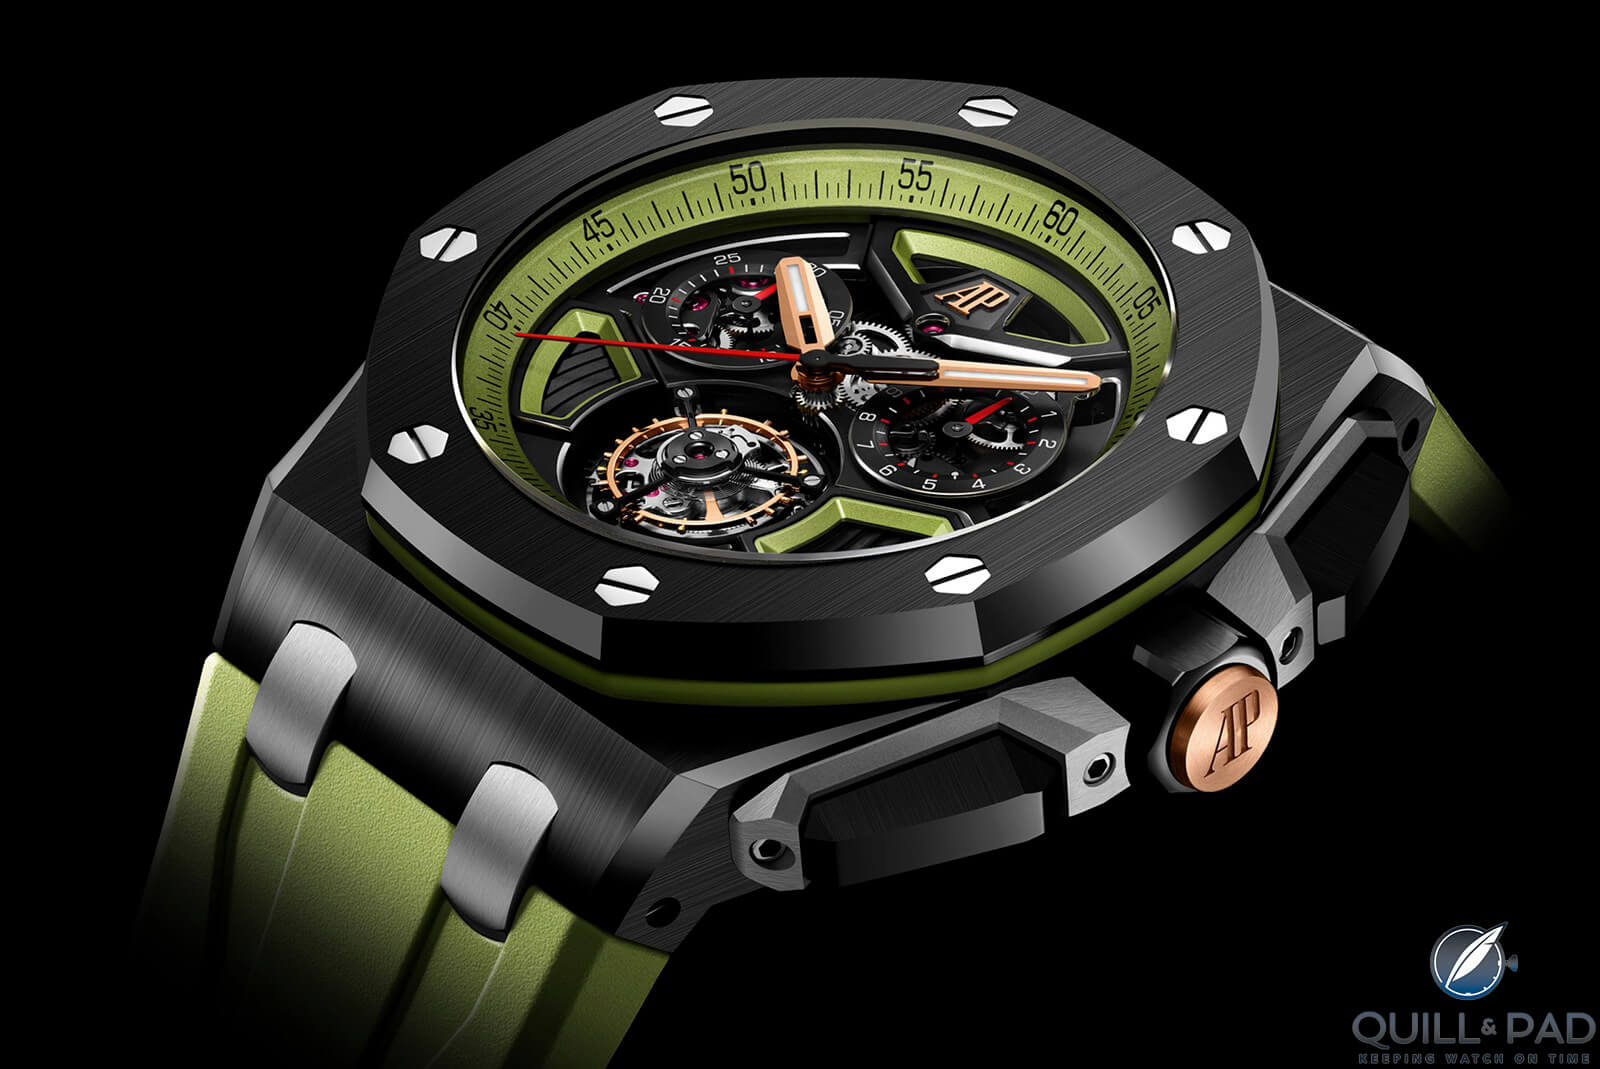 A New Generation Of Royal Oak Offshore Premieres In 43mm